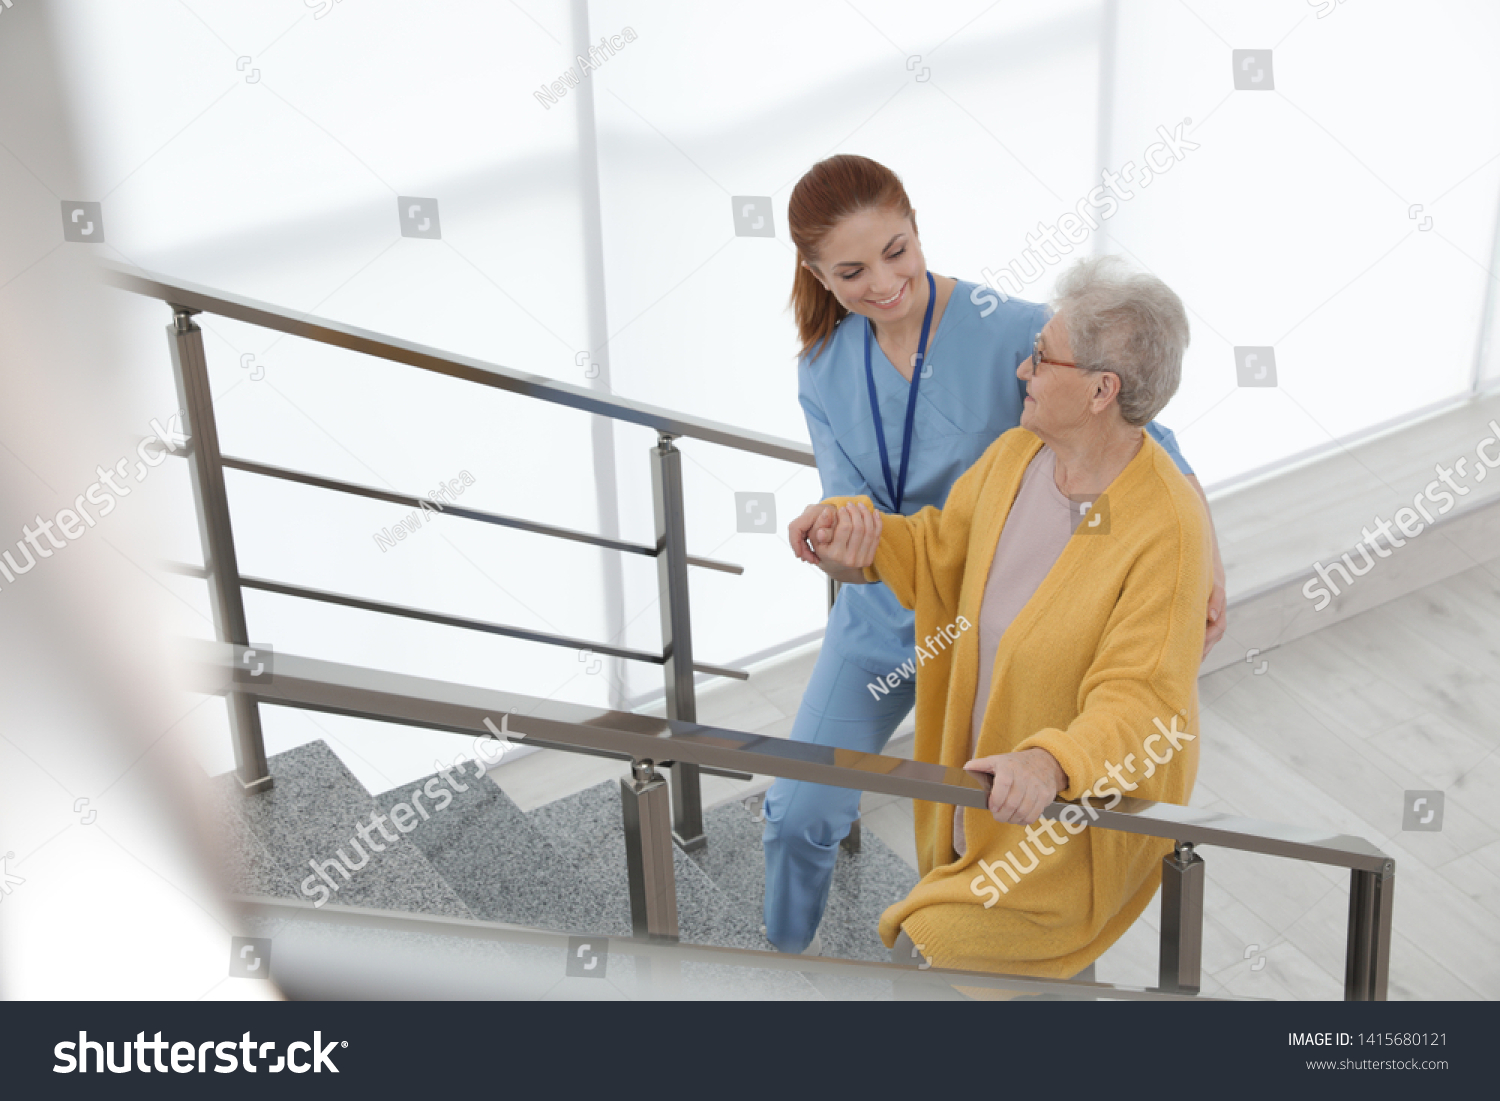 Nurse assisting senior woman to go up stairs at hospital #1415680121